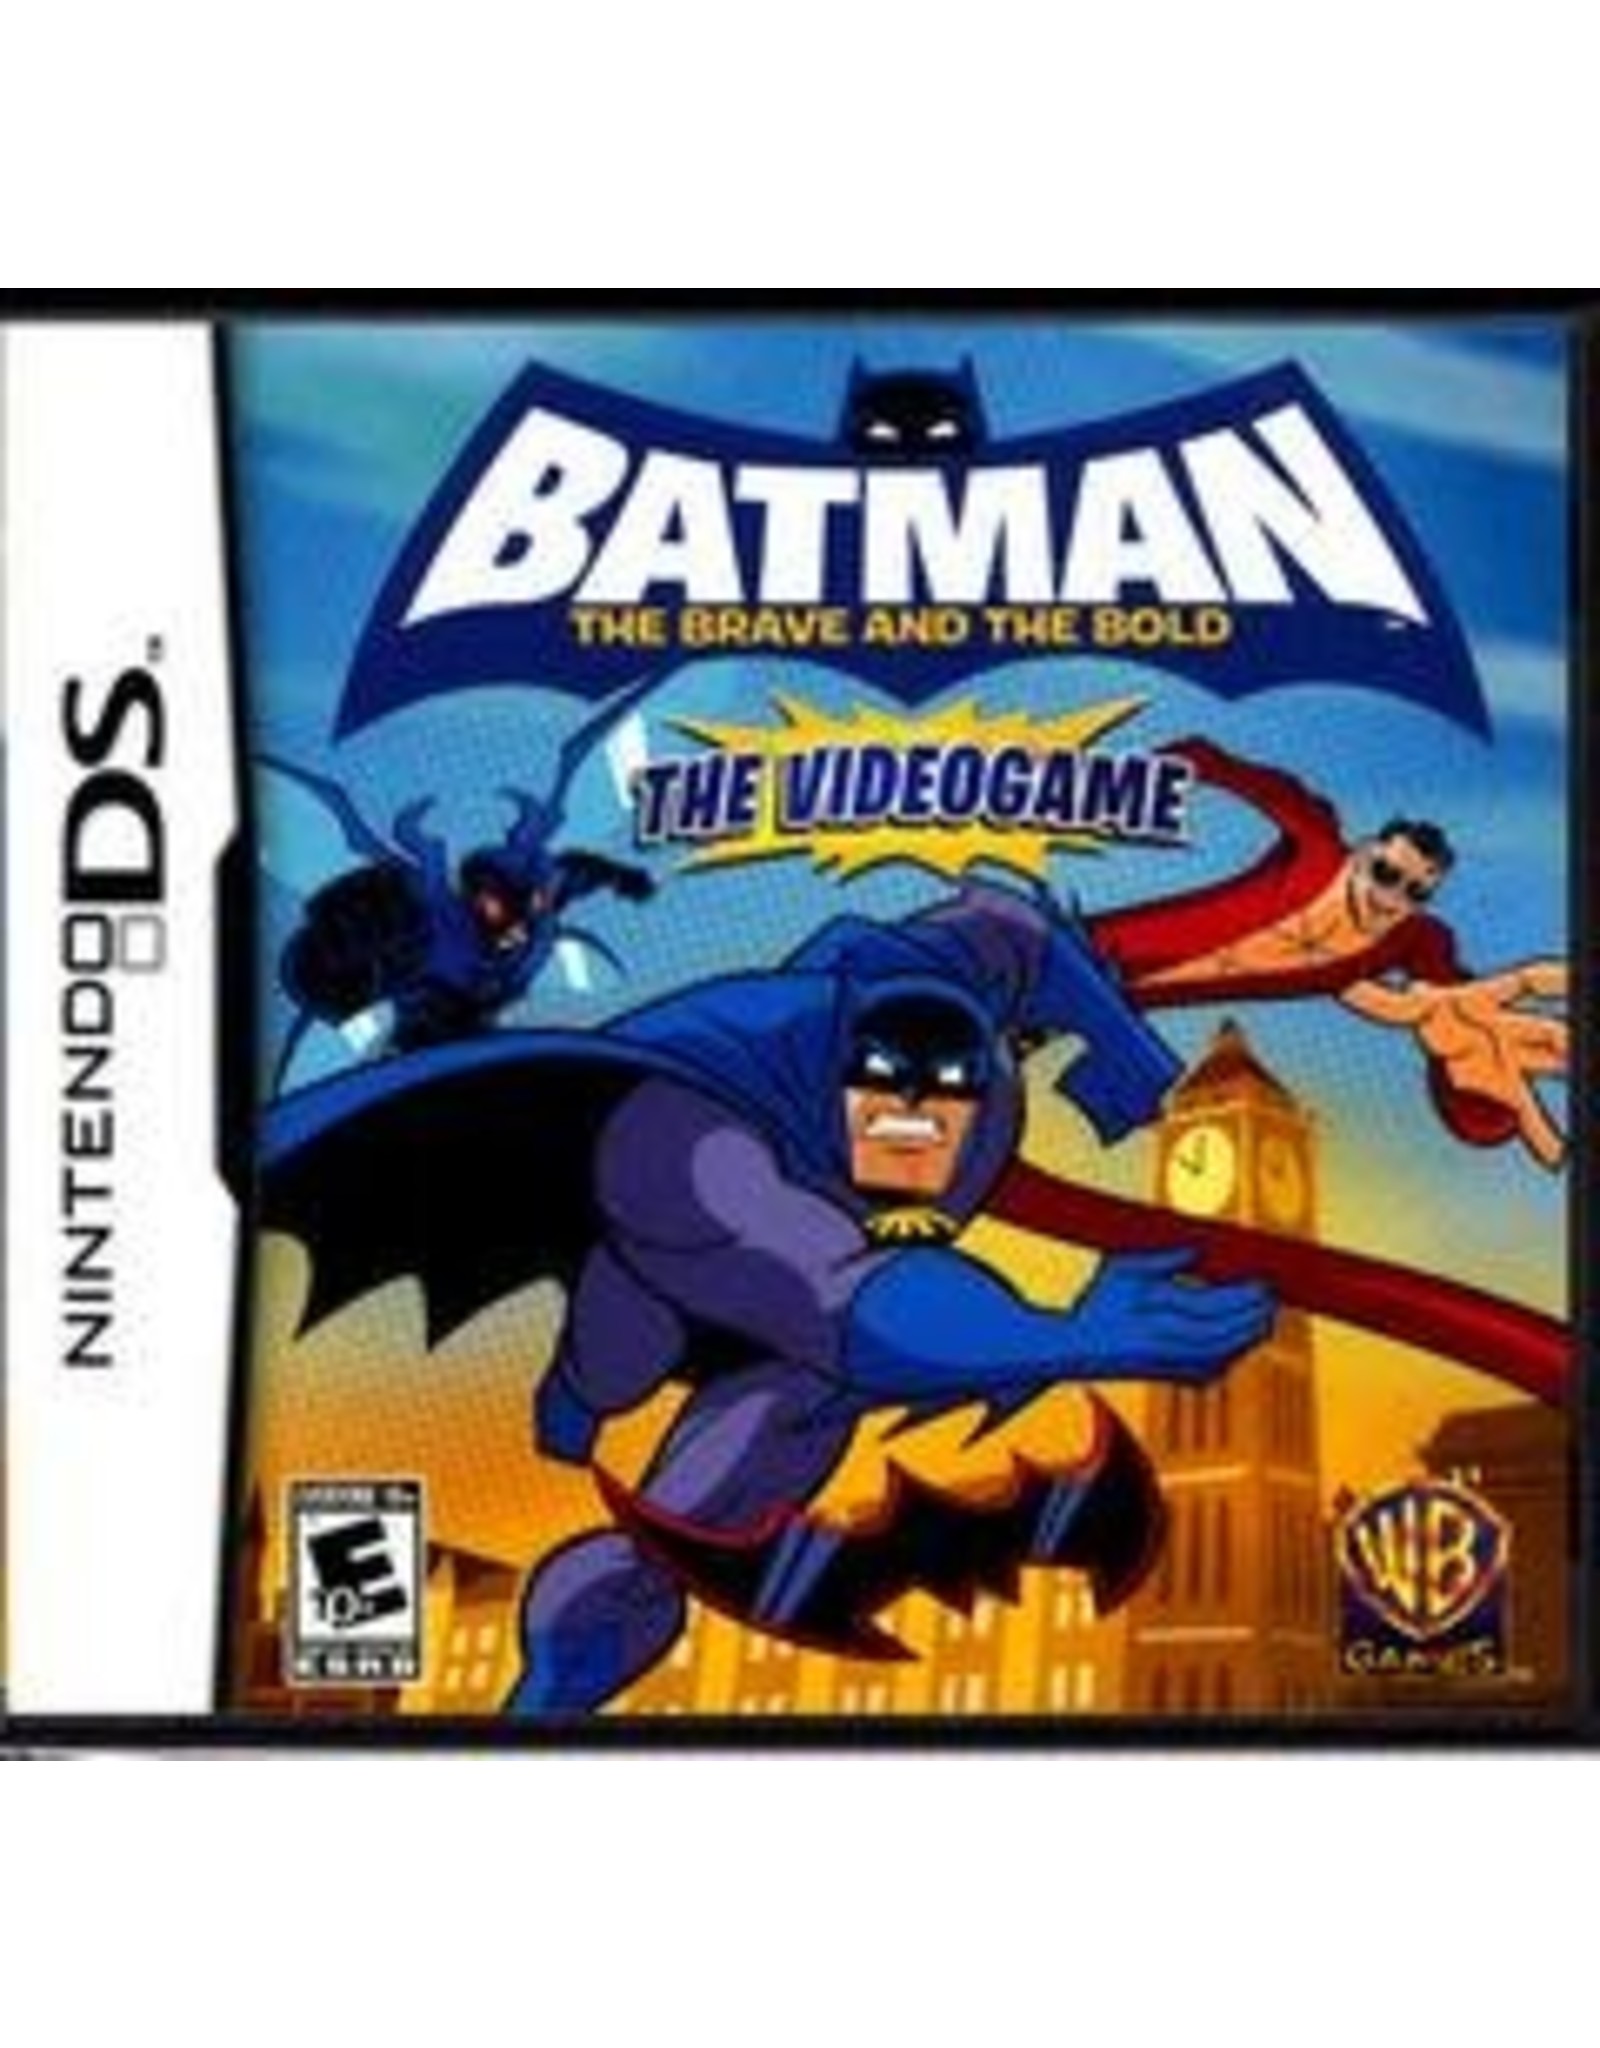 Nintendo DS Batman The Brave and the Bold (Cart Only)